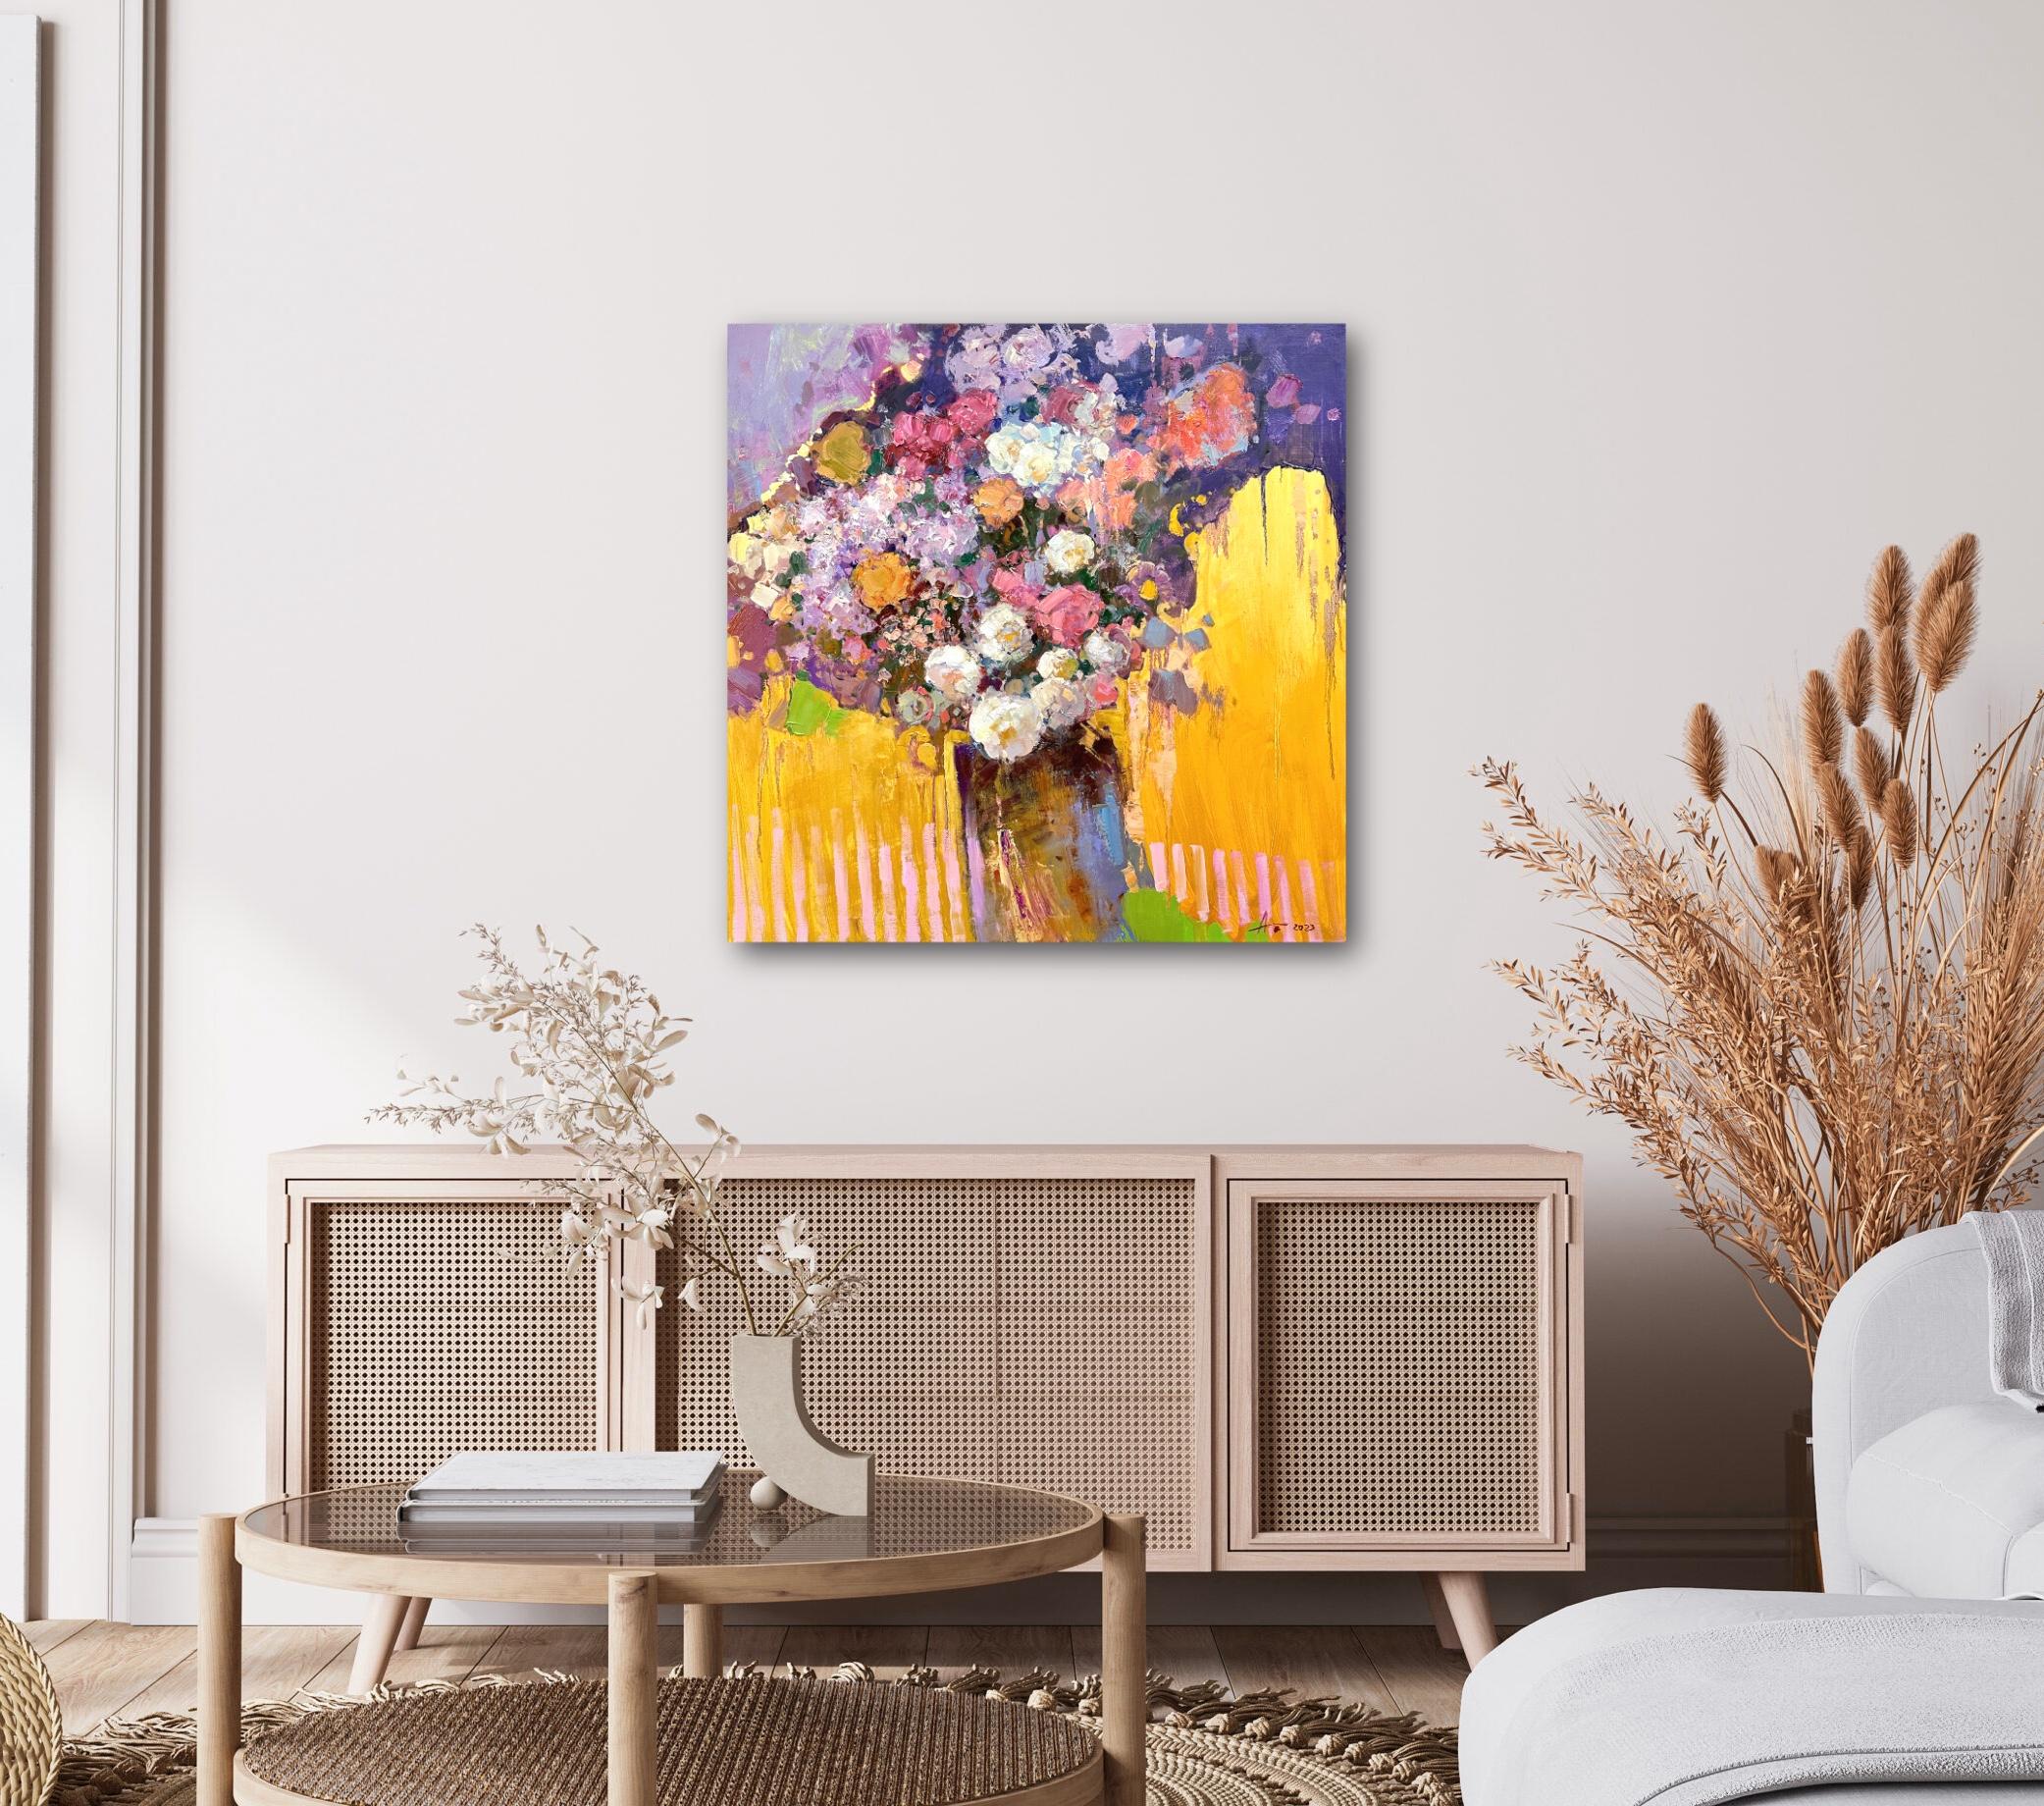 Bouquet on gold Original Oil Painting with Flowers by Andrei Belaichuk For Sale 6